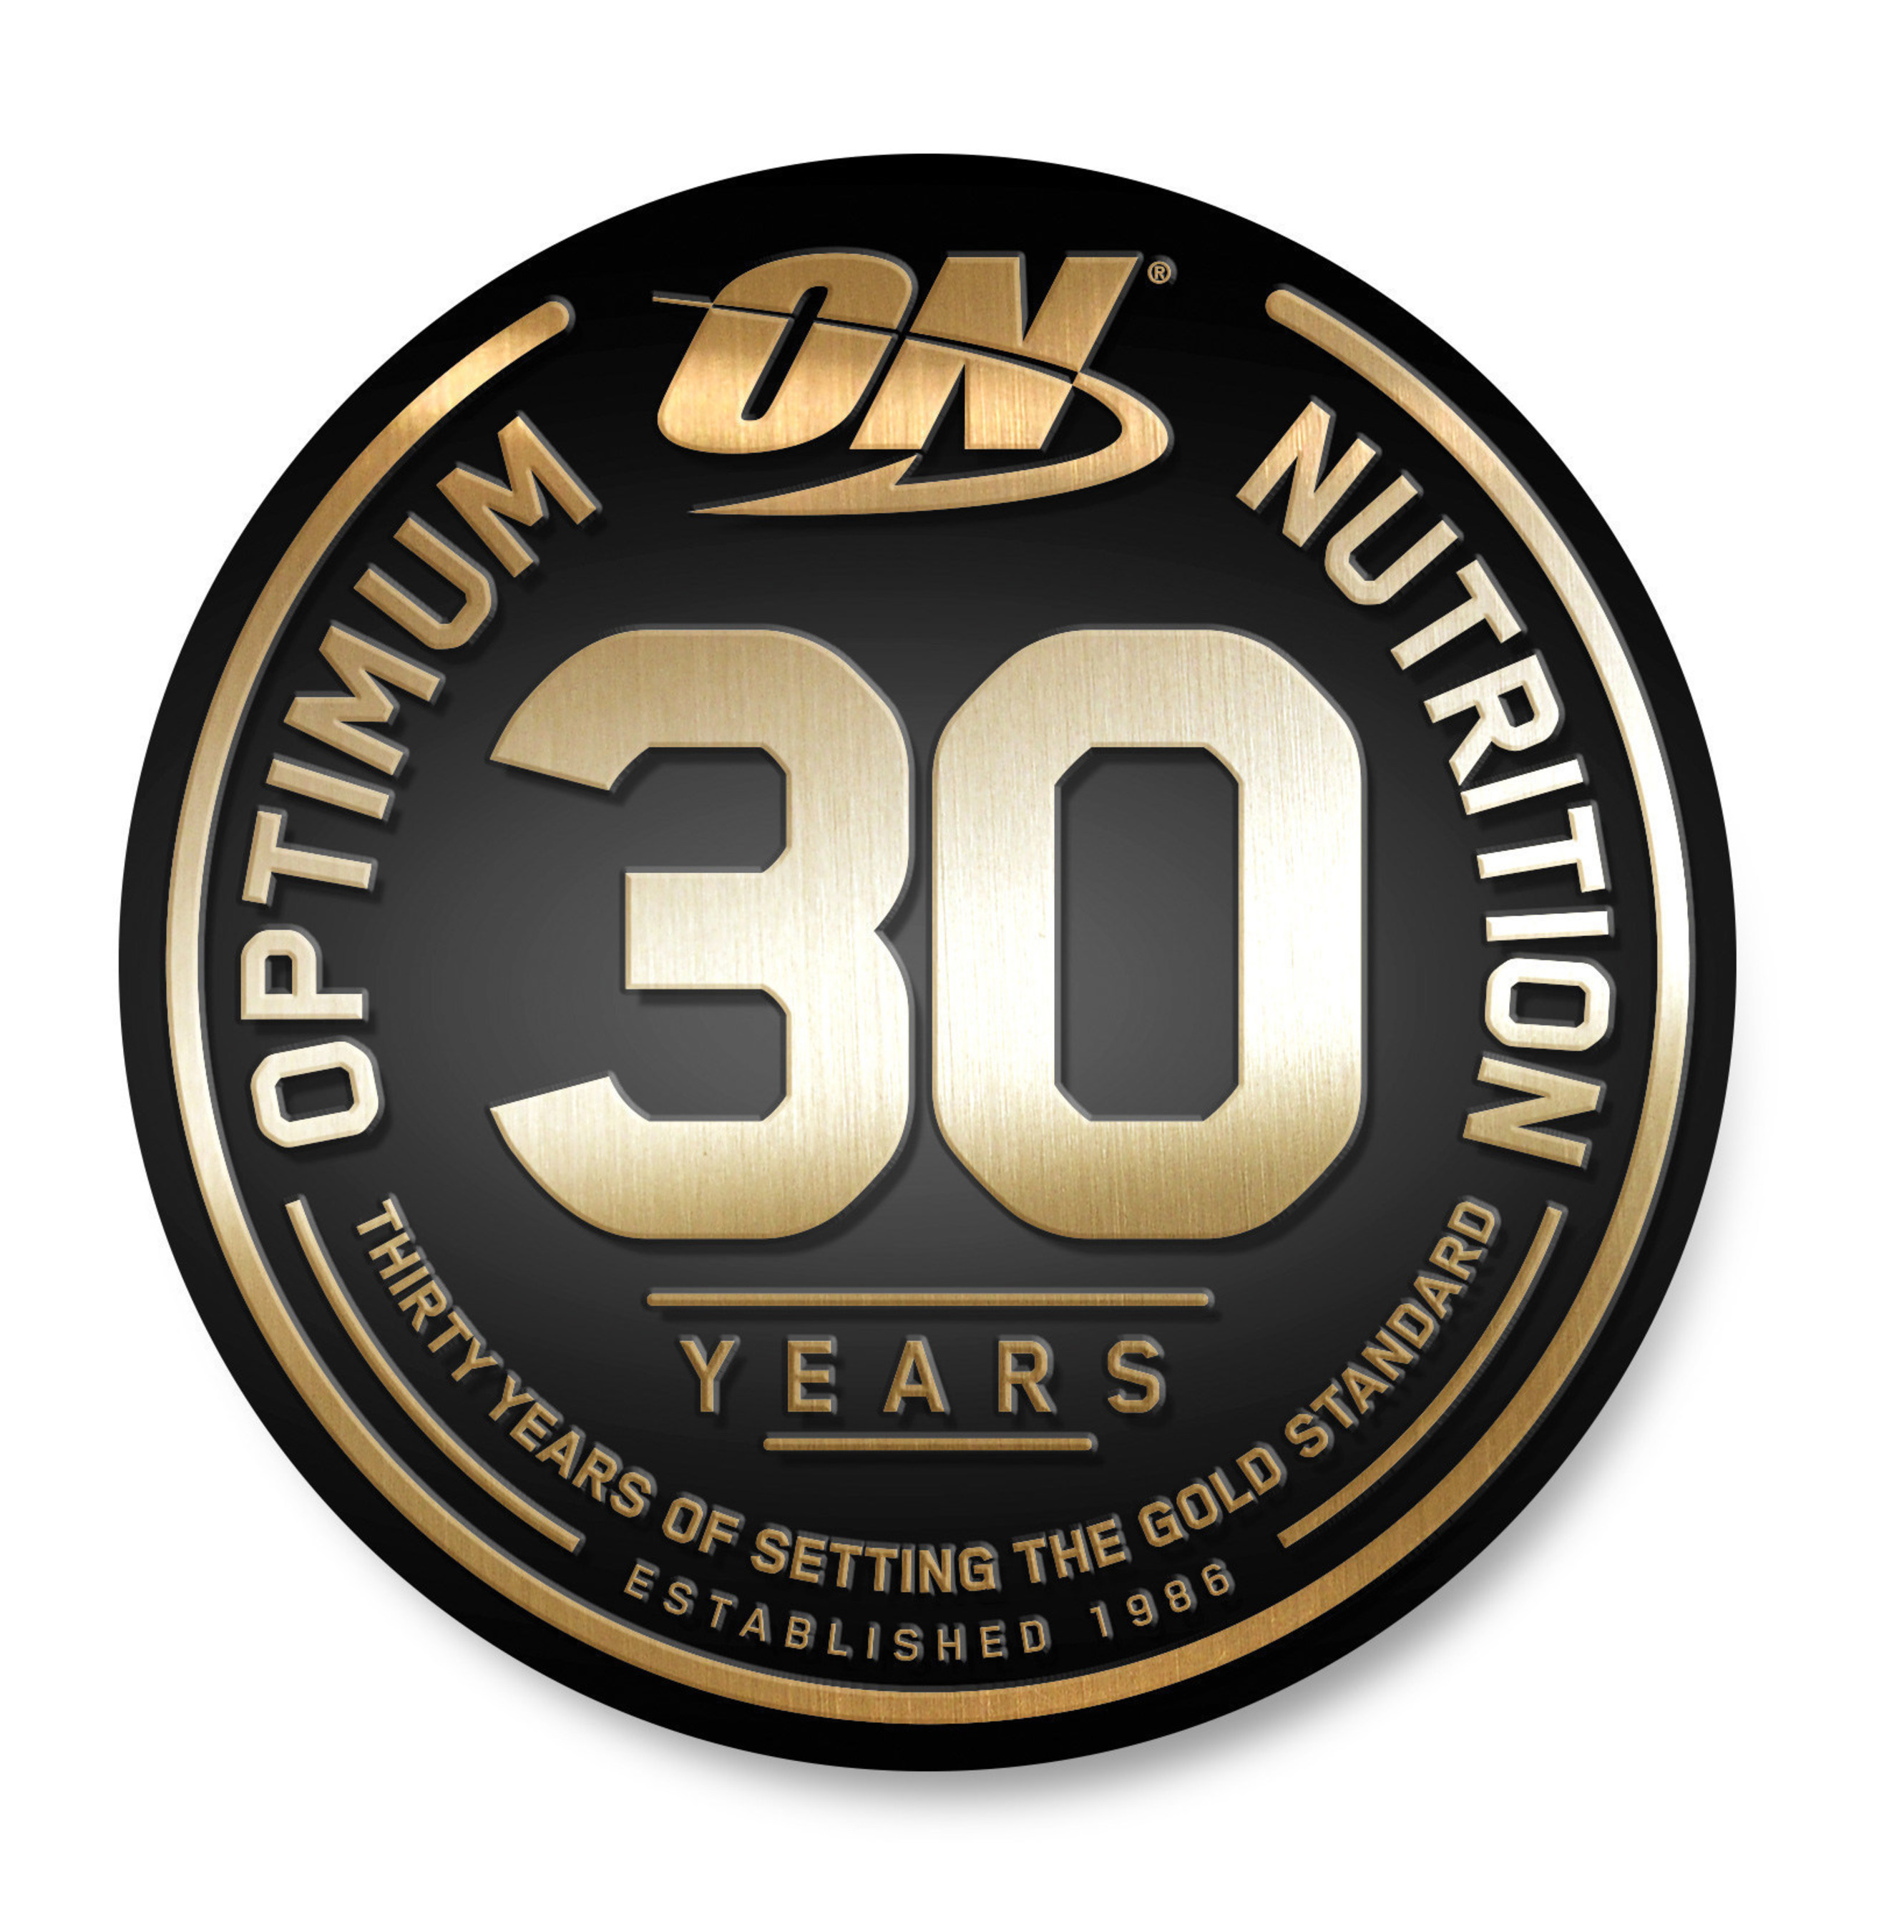 Prominent Sports Nutrition Brand Optimum Nutrition Celebrates Thirty Years